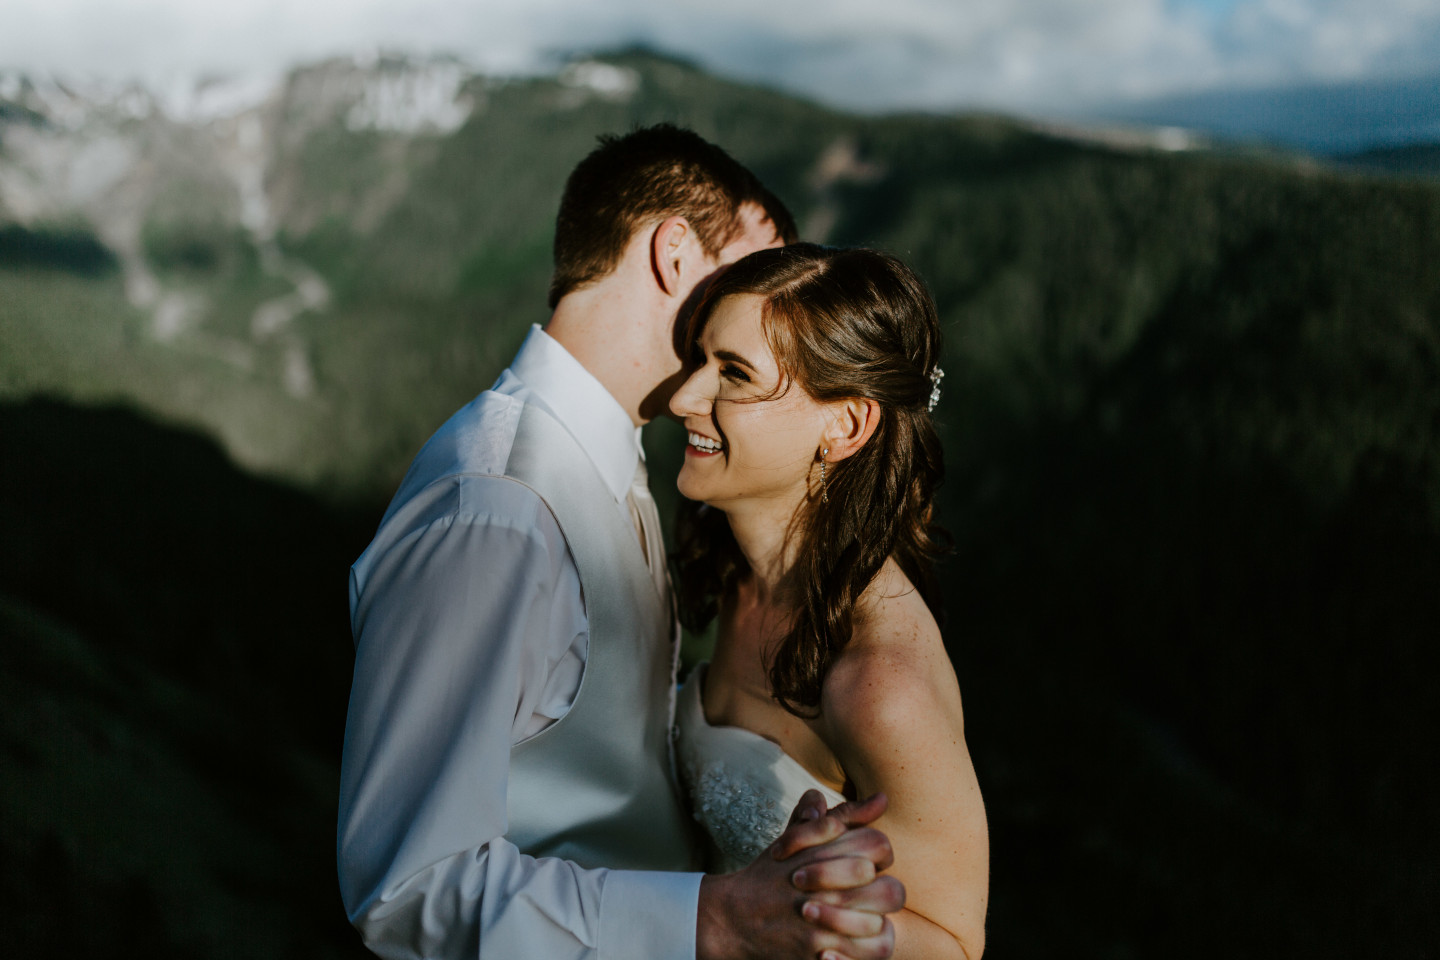 Ryan and Moira move in for a kiss in front of Mount Hood. Adventure elopement wedding shoot by Sienna Plus Josh.